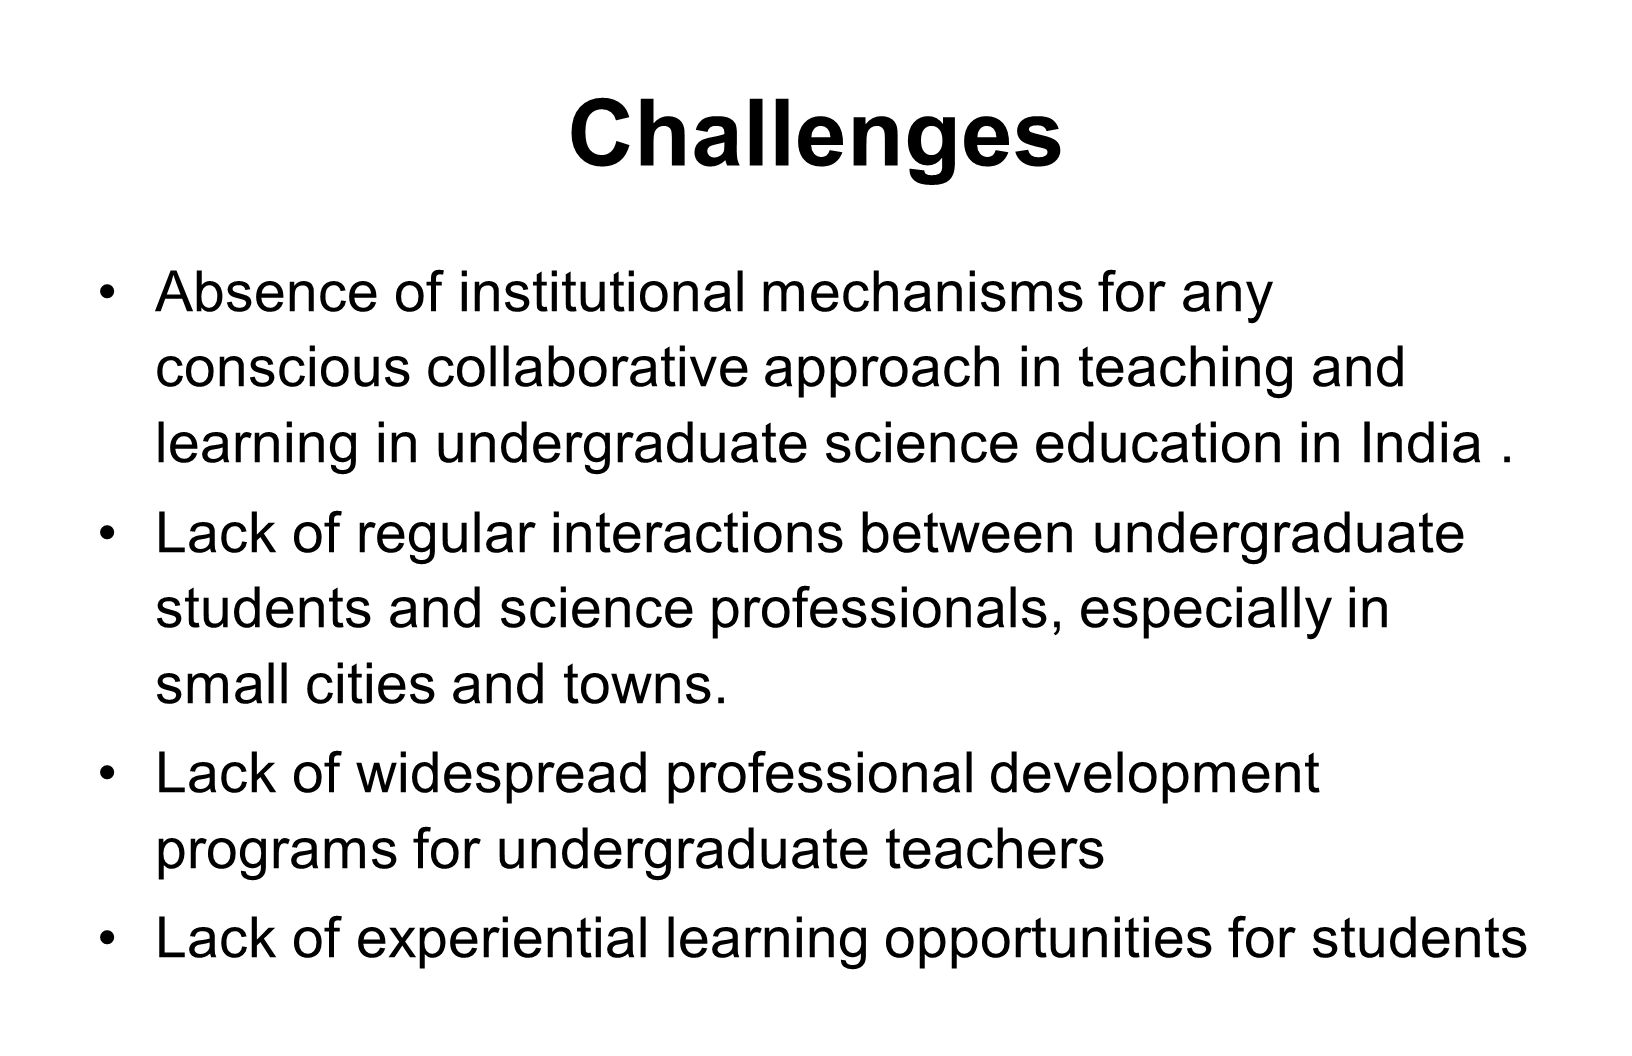 Challenges Absence of institutional mechanisms for any conscious collaborative approach in teaching and learning in undergraduate science education in India.